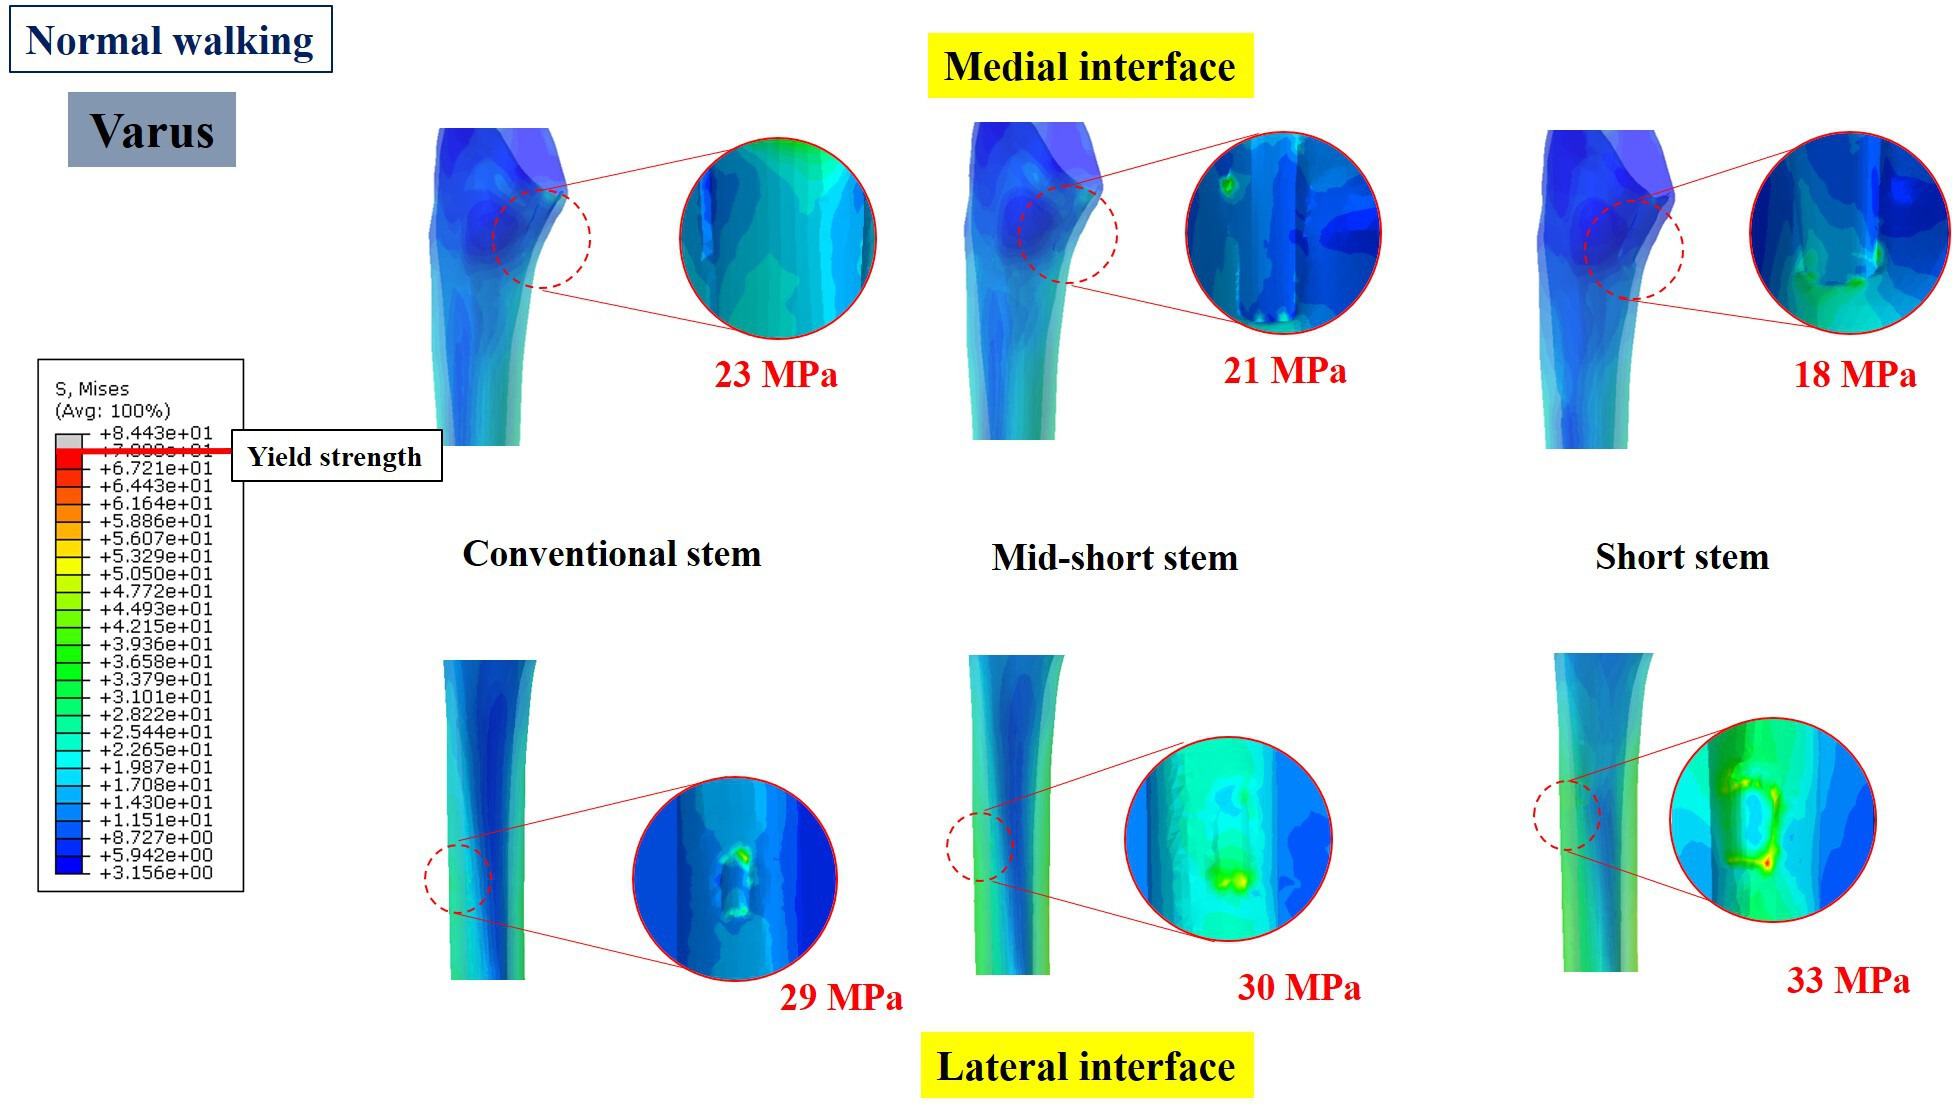 Fig. 3 
            Stress distribution at the medial and lateral interfaces of the cortical bone around the varus-inserted stem in normal walking condition. The circle images represent the stress concentration at medial calcar and lateral cortex region in contact with the stem tip. The number indicates the mean stress over a region of interest.
          